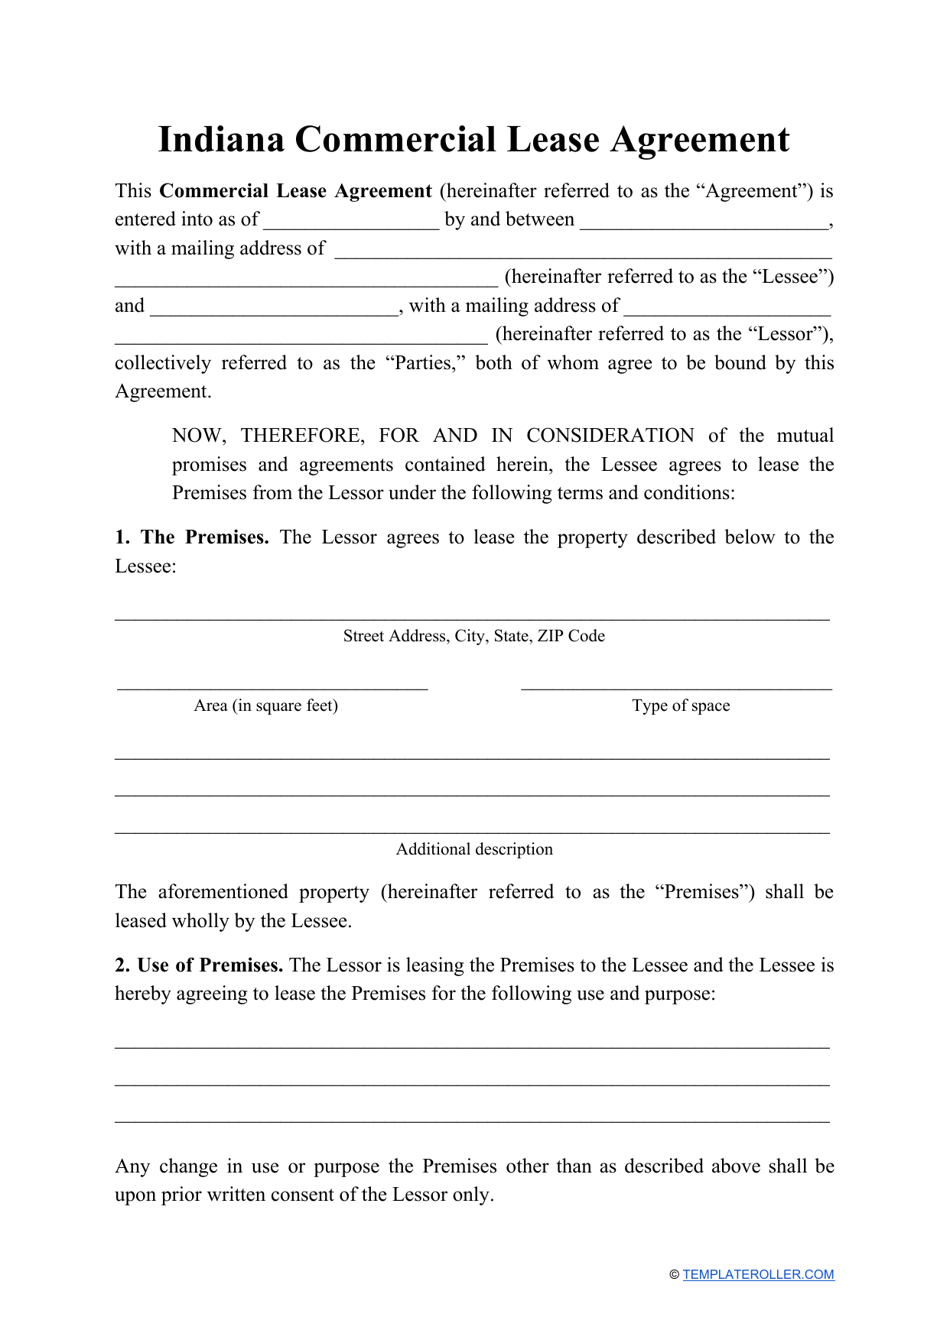 indiana commercial lease agreement template download printable pdf